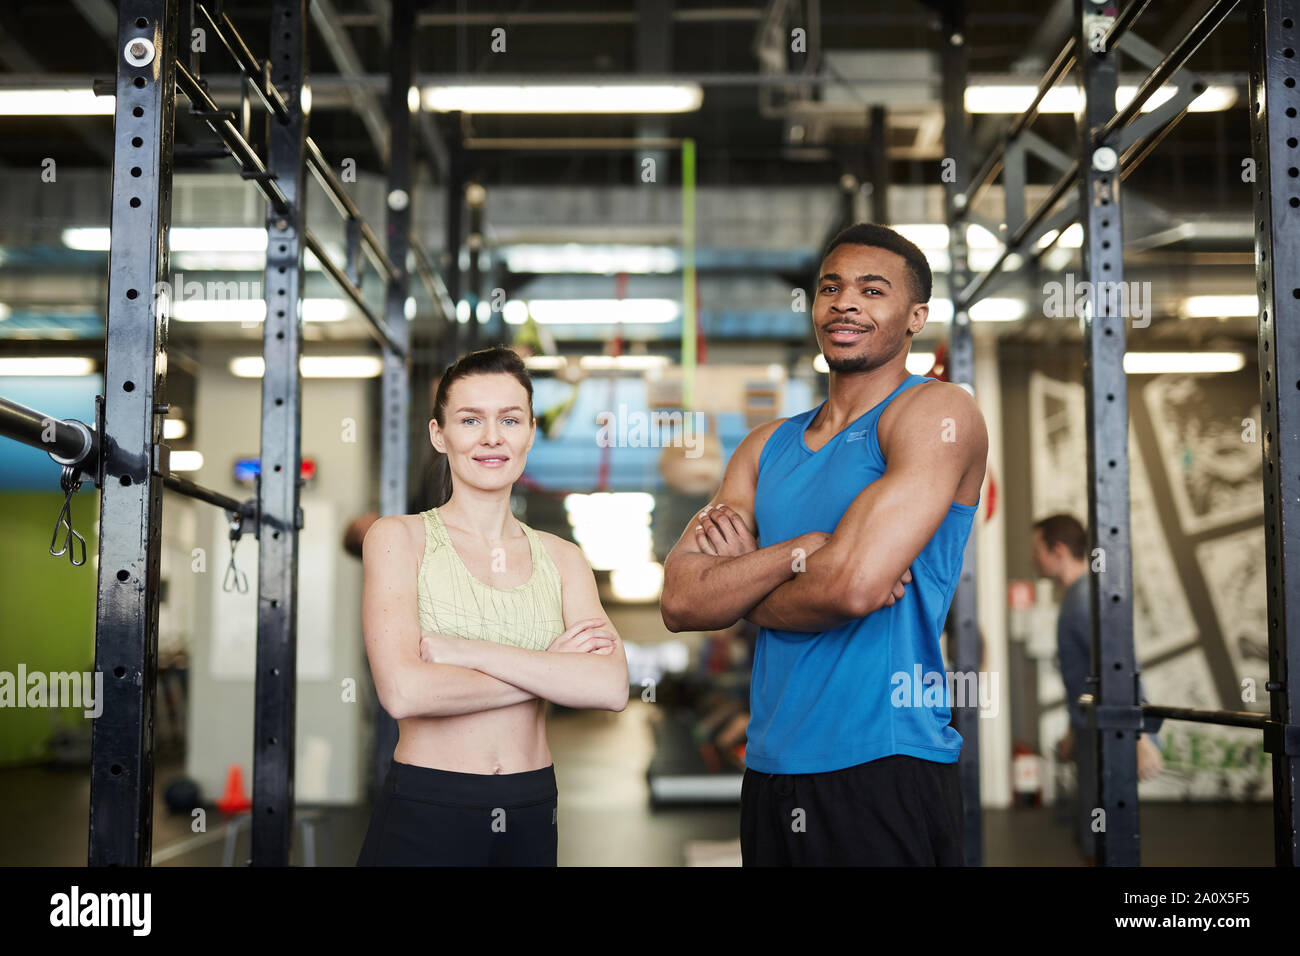 Waist up portrait of sportive couple, African man and Caucasian woman, posing confidently standing in modern gym and smiling at camera Stock Photo